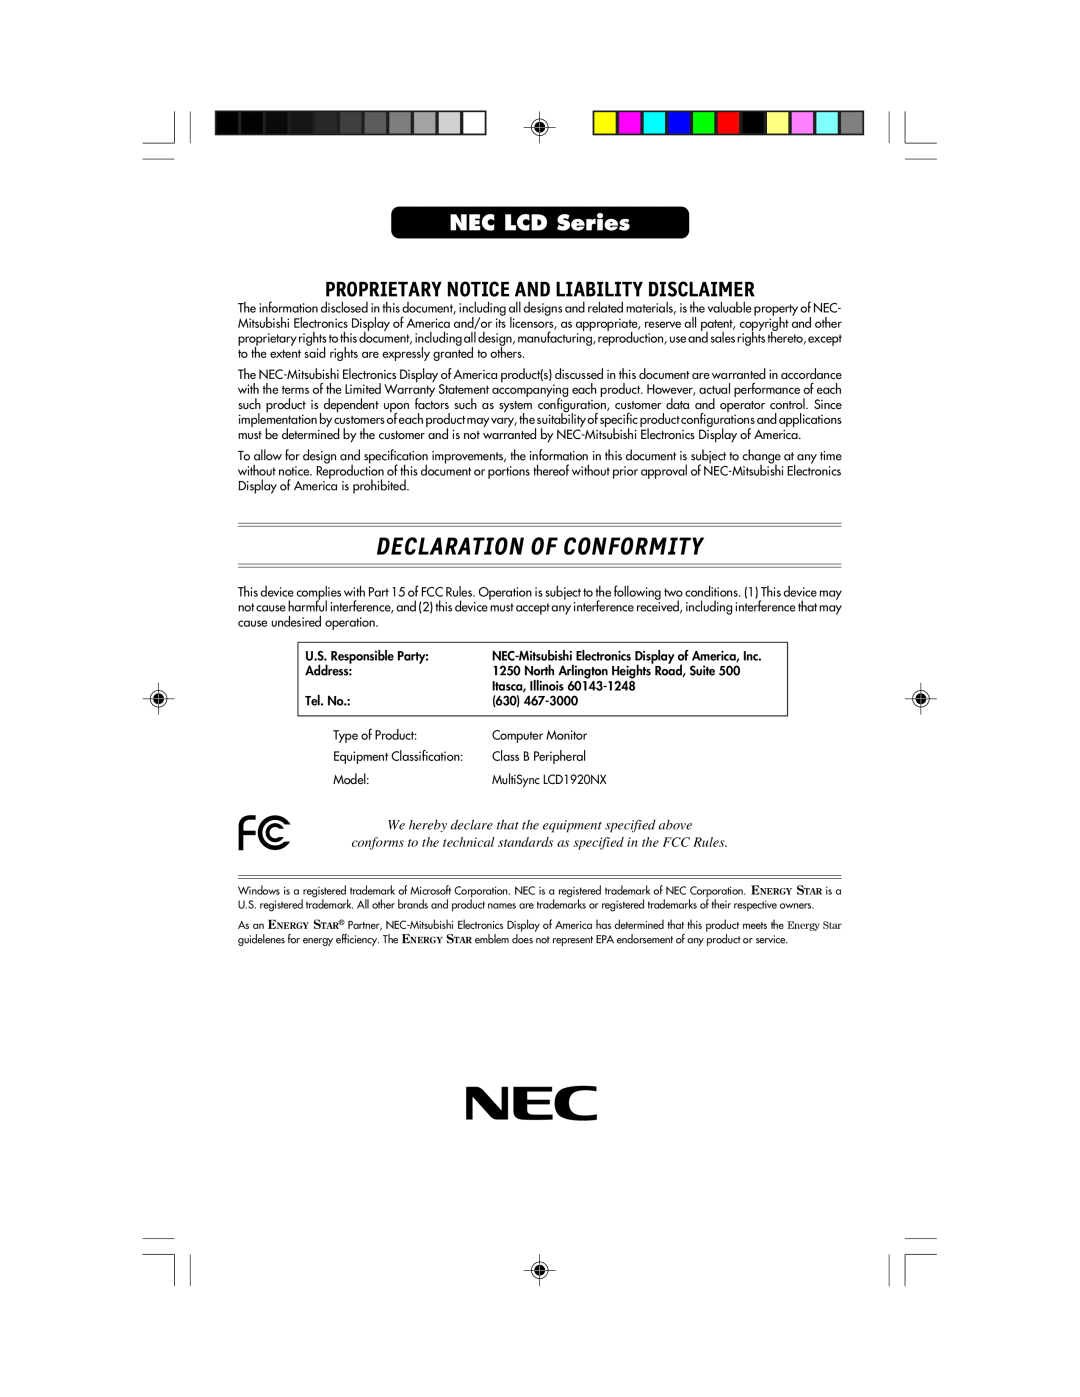 NEC LCD1920NX manual Declaration Of Conformity, NEC LCD Series, Proprietary Notice And Liability Disclaimer 